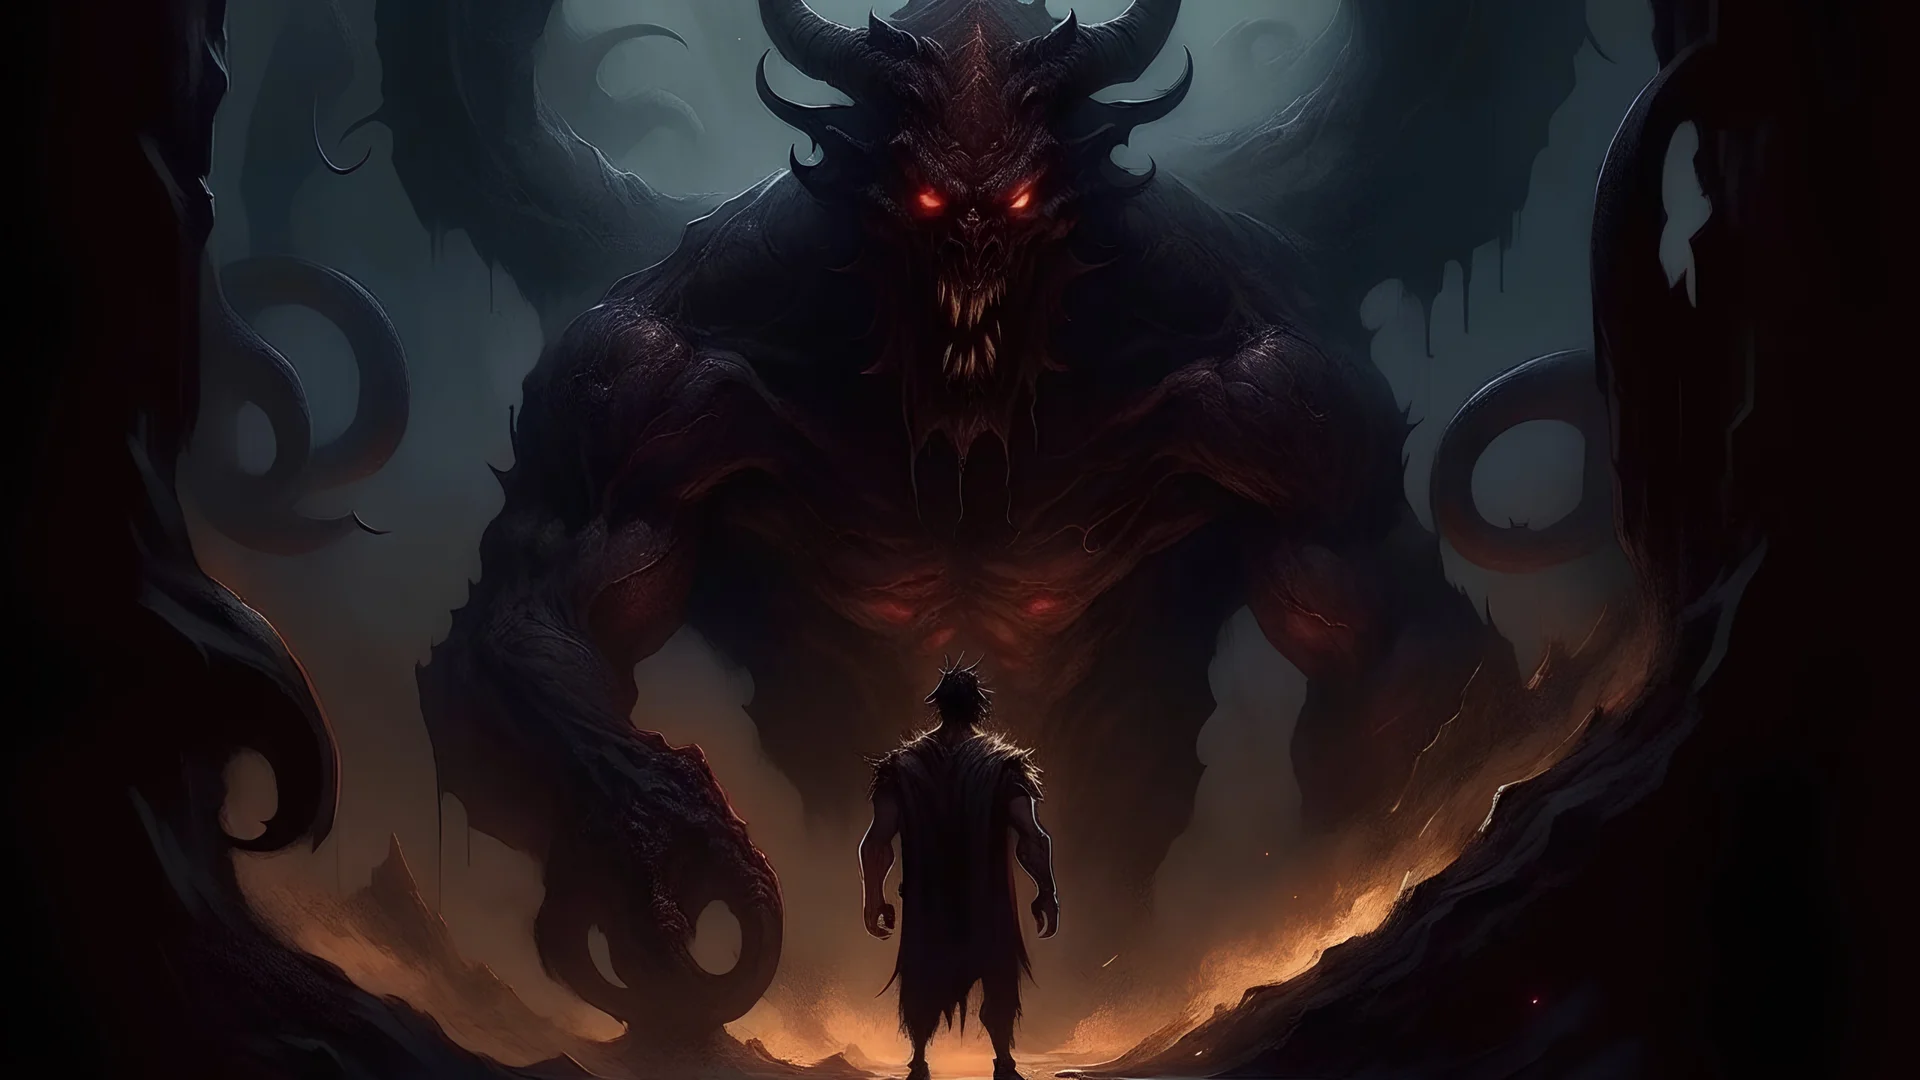 ðŸŽ¨ Take a look at this incredible artwork of a man fearlessly standing next to a menacing demon